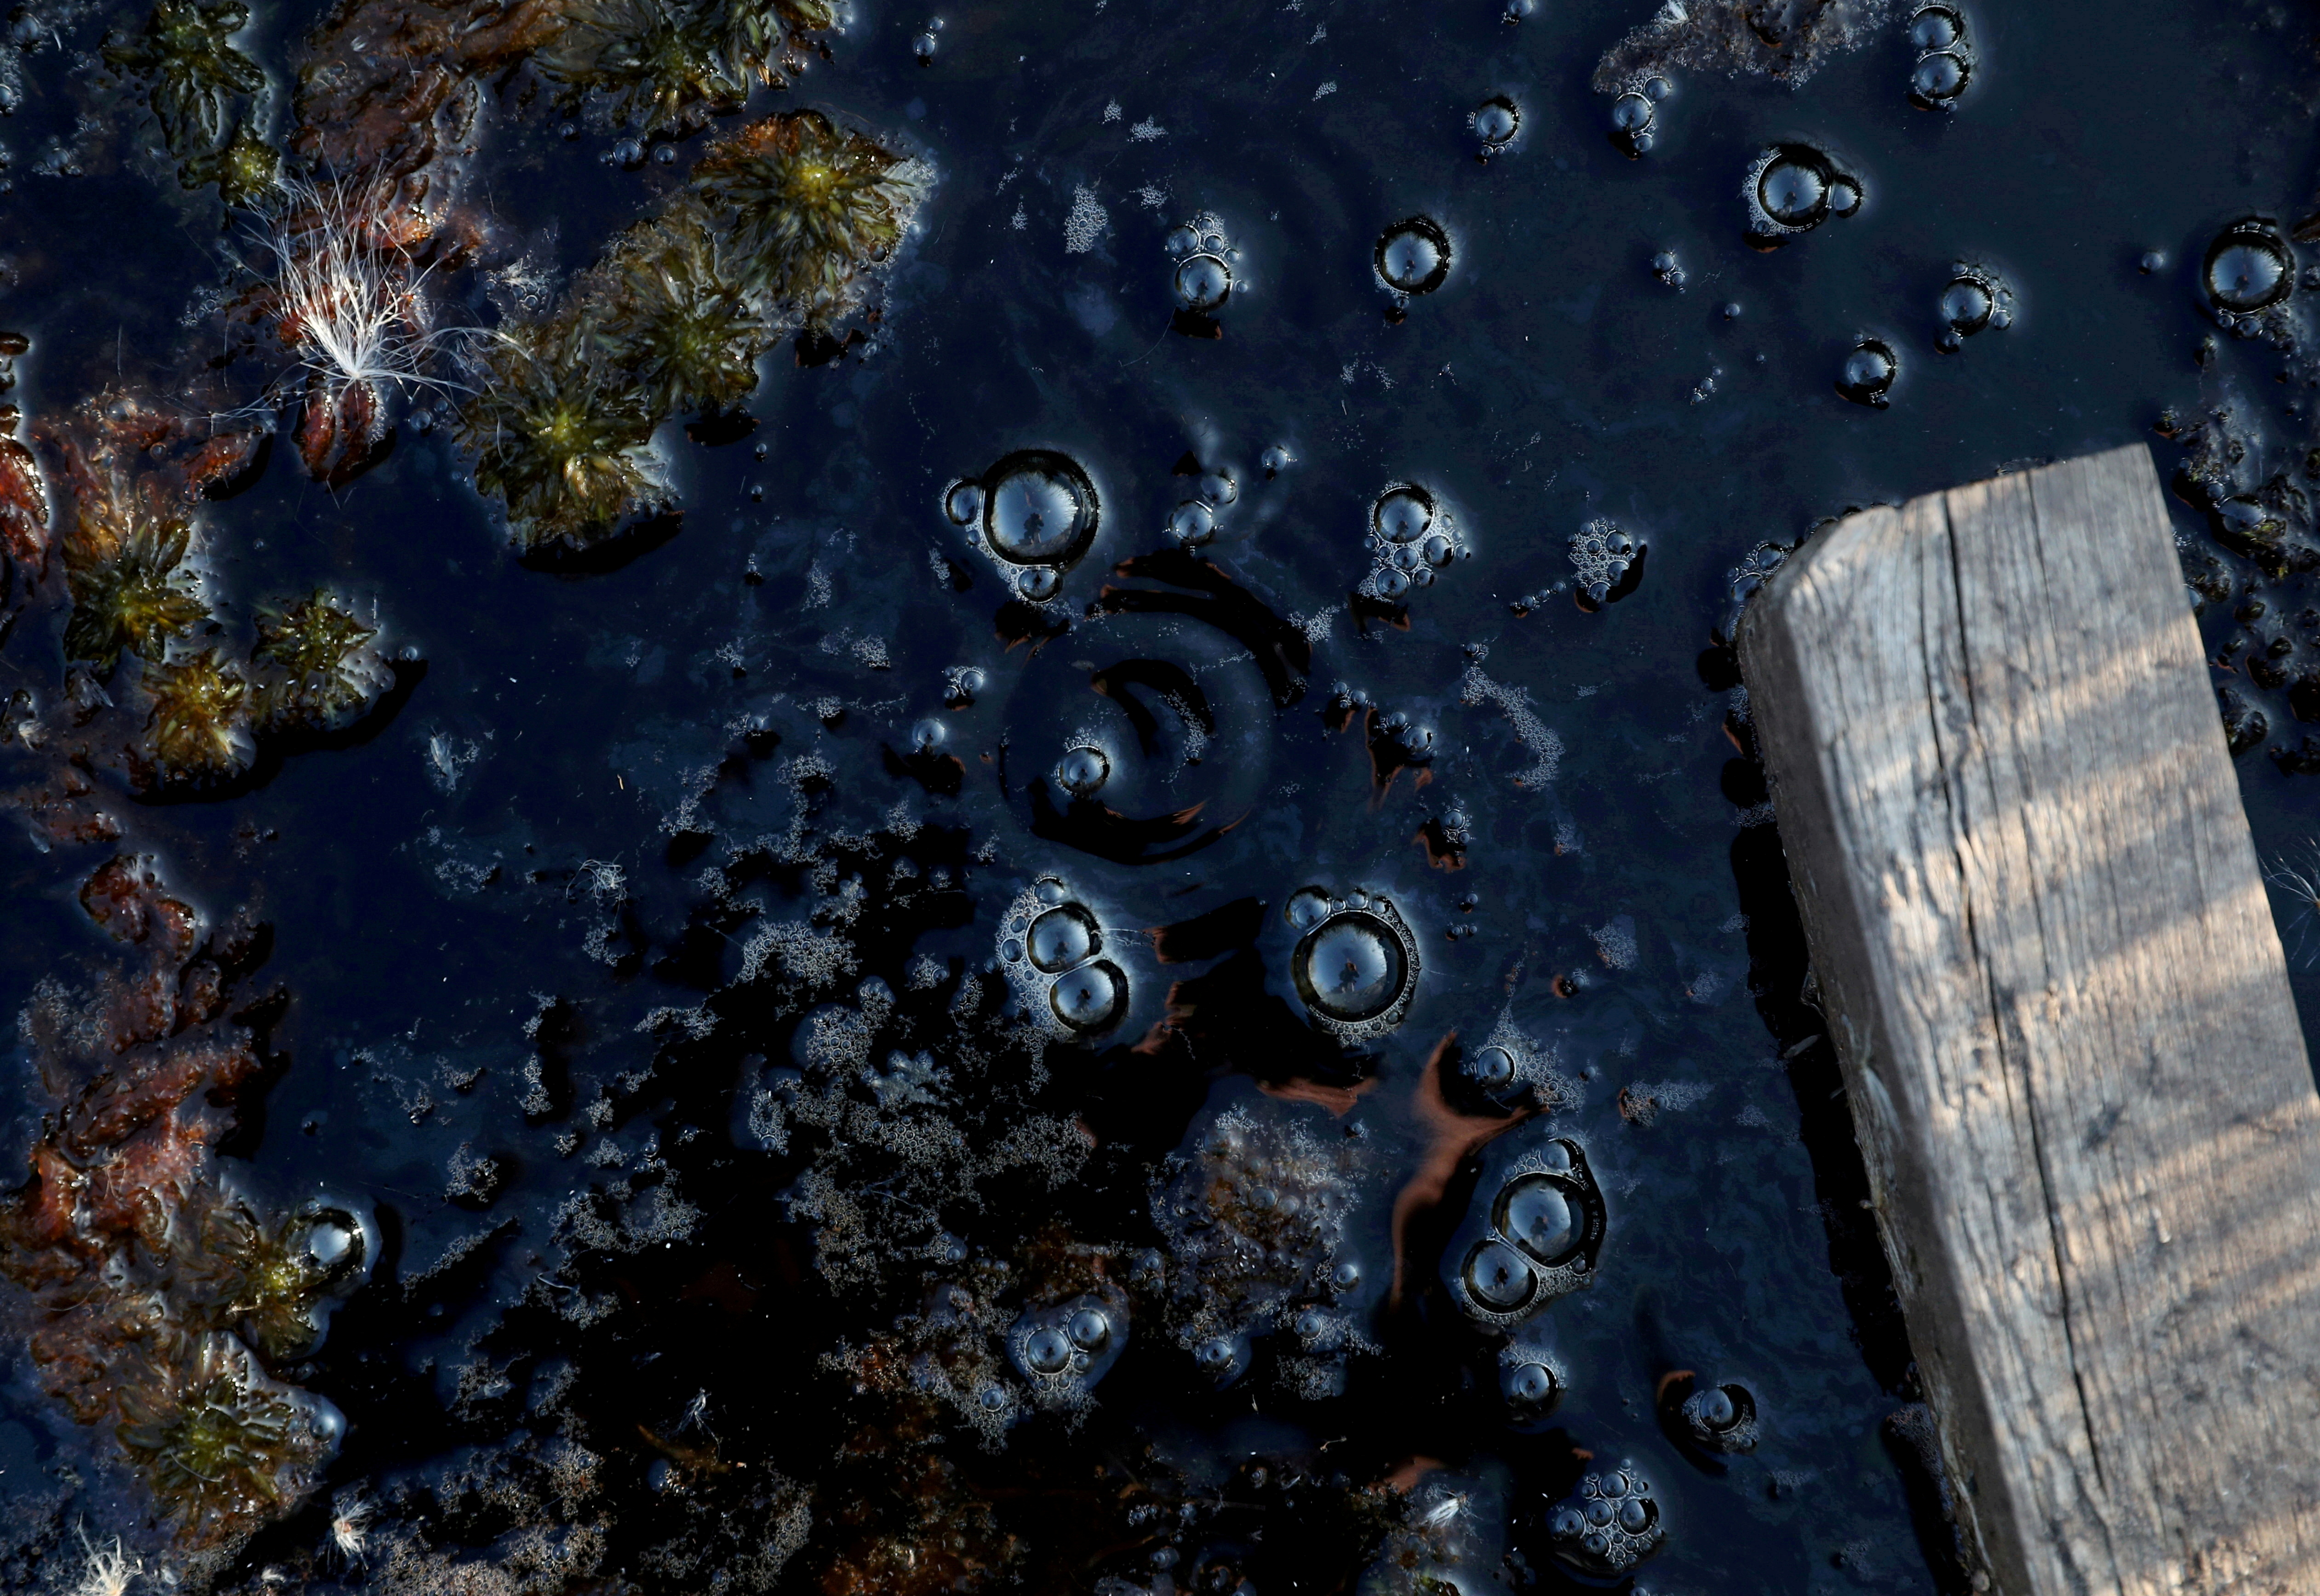 Methane bubbles are seen in an area of marshland at a research post at Stordalen Mire near Abisko, Sweden, August 1, 2019. REUTERS/Hannah McKay